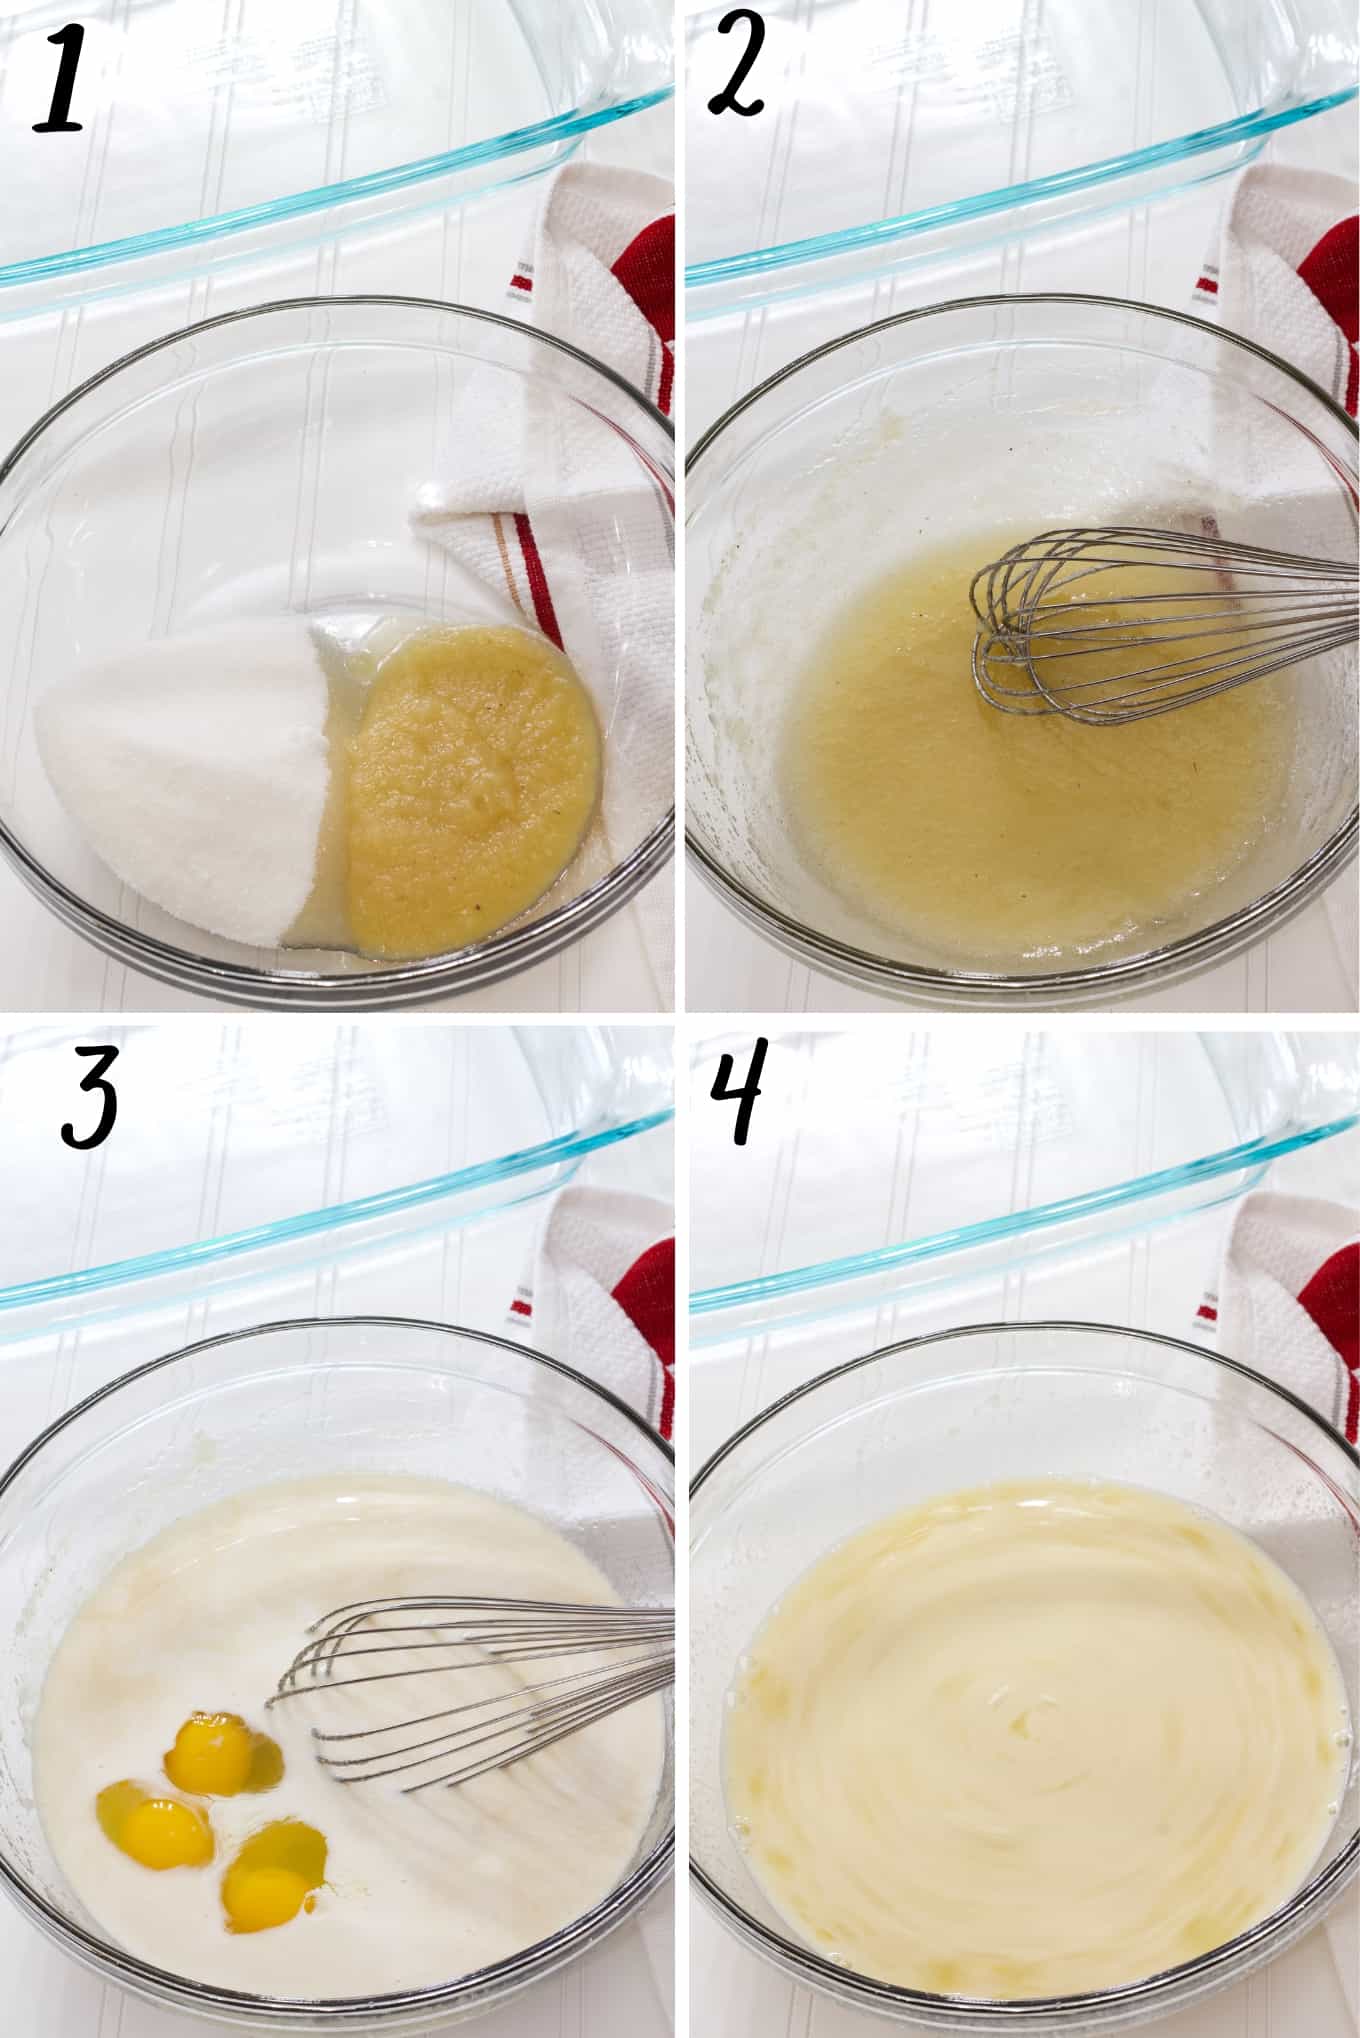 A collage of numbered images showing the first 4 steps to make the recipe.